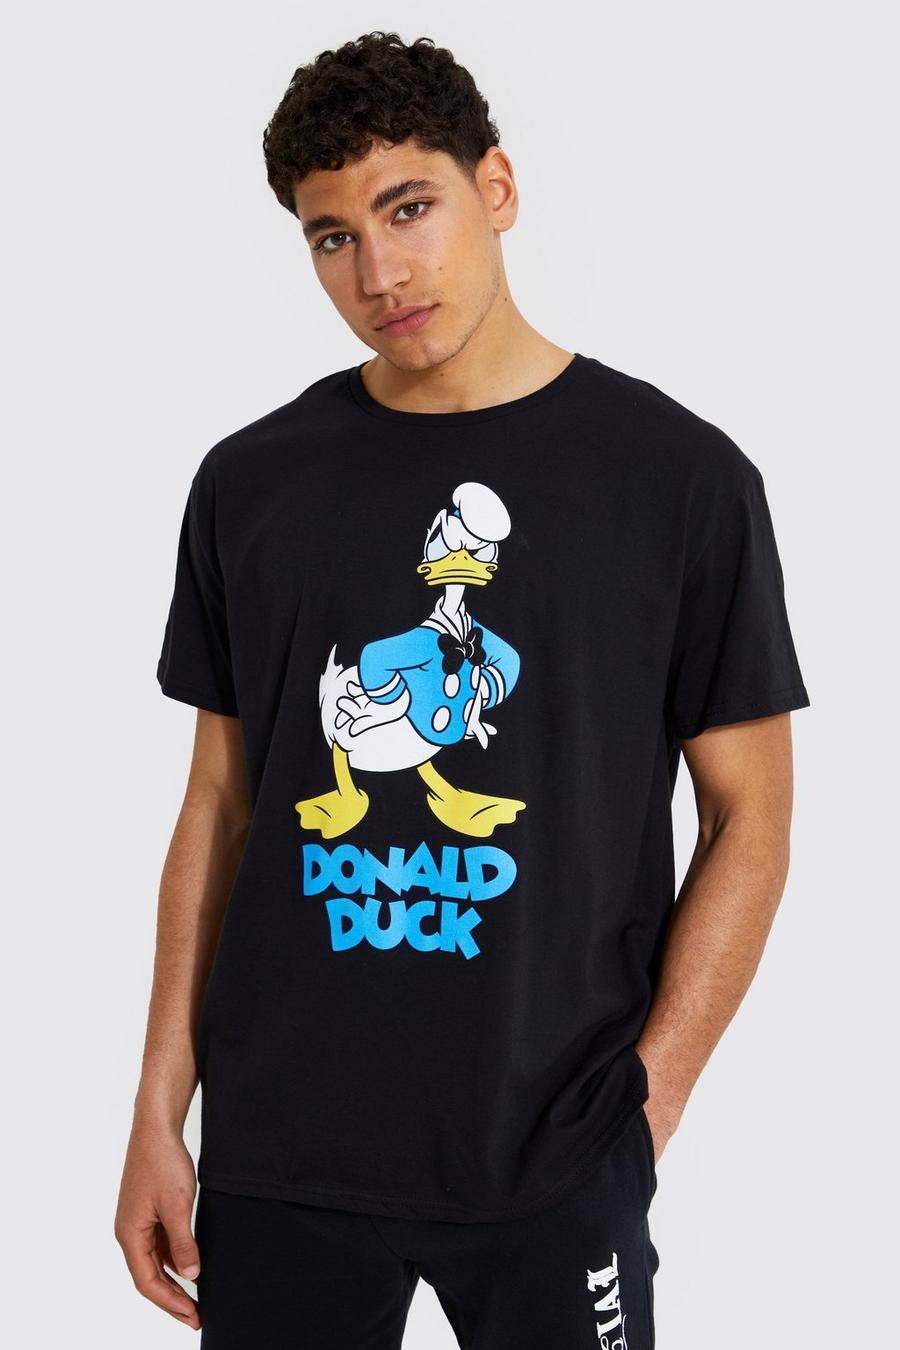 Black Angry Donald Duck T-shirt